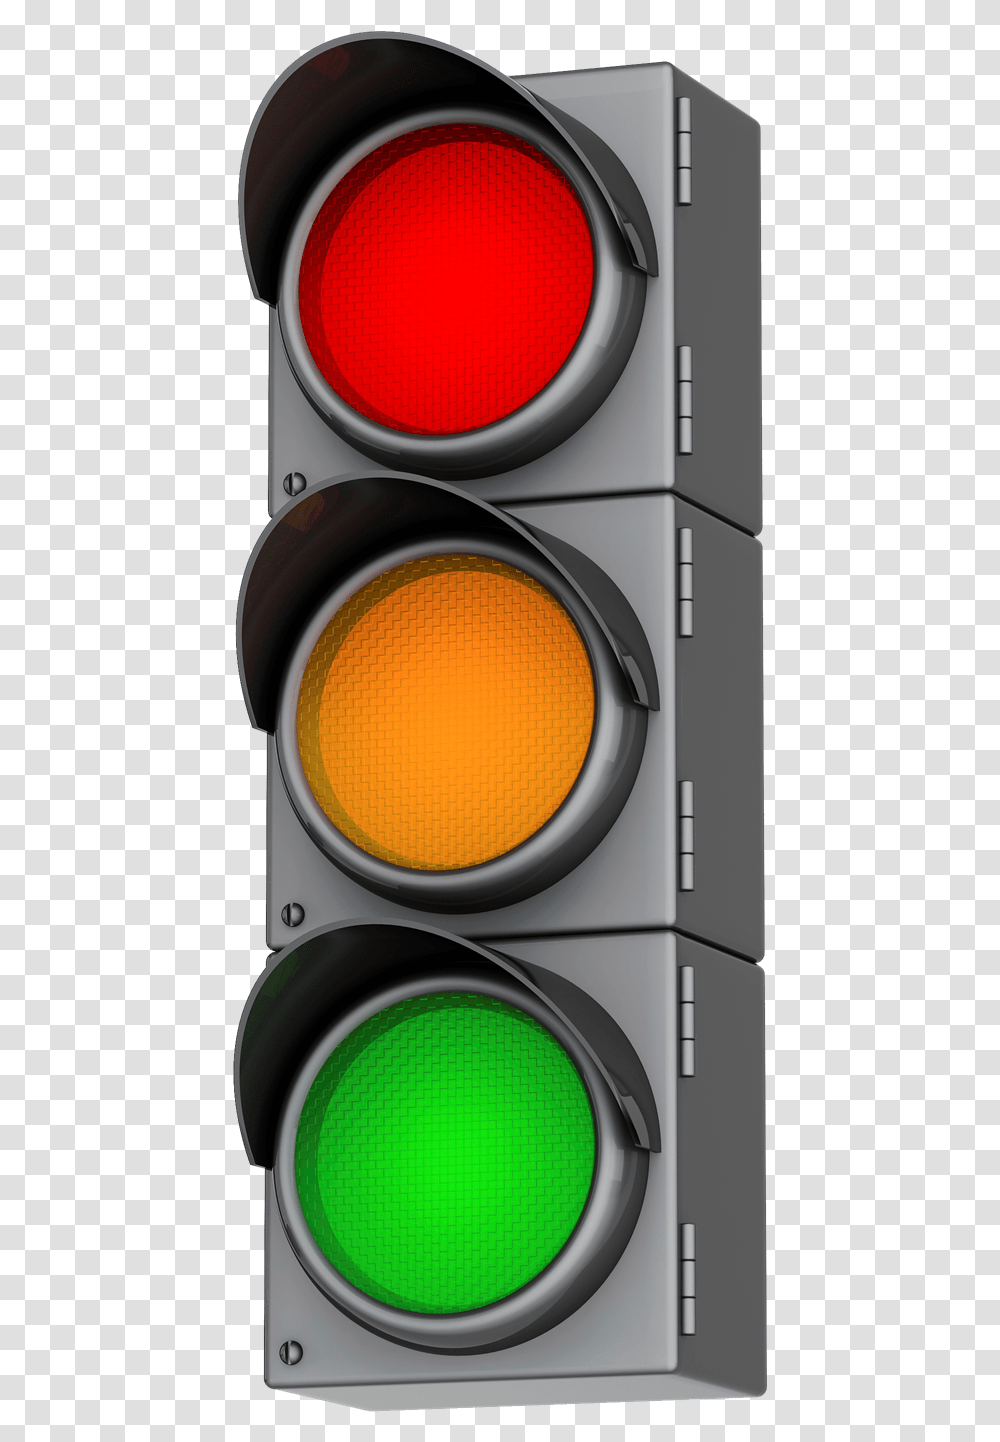 Cartoon Pictures Of Traffic Lights Transparent Png